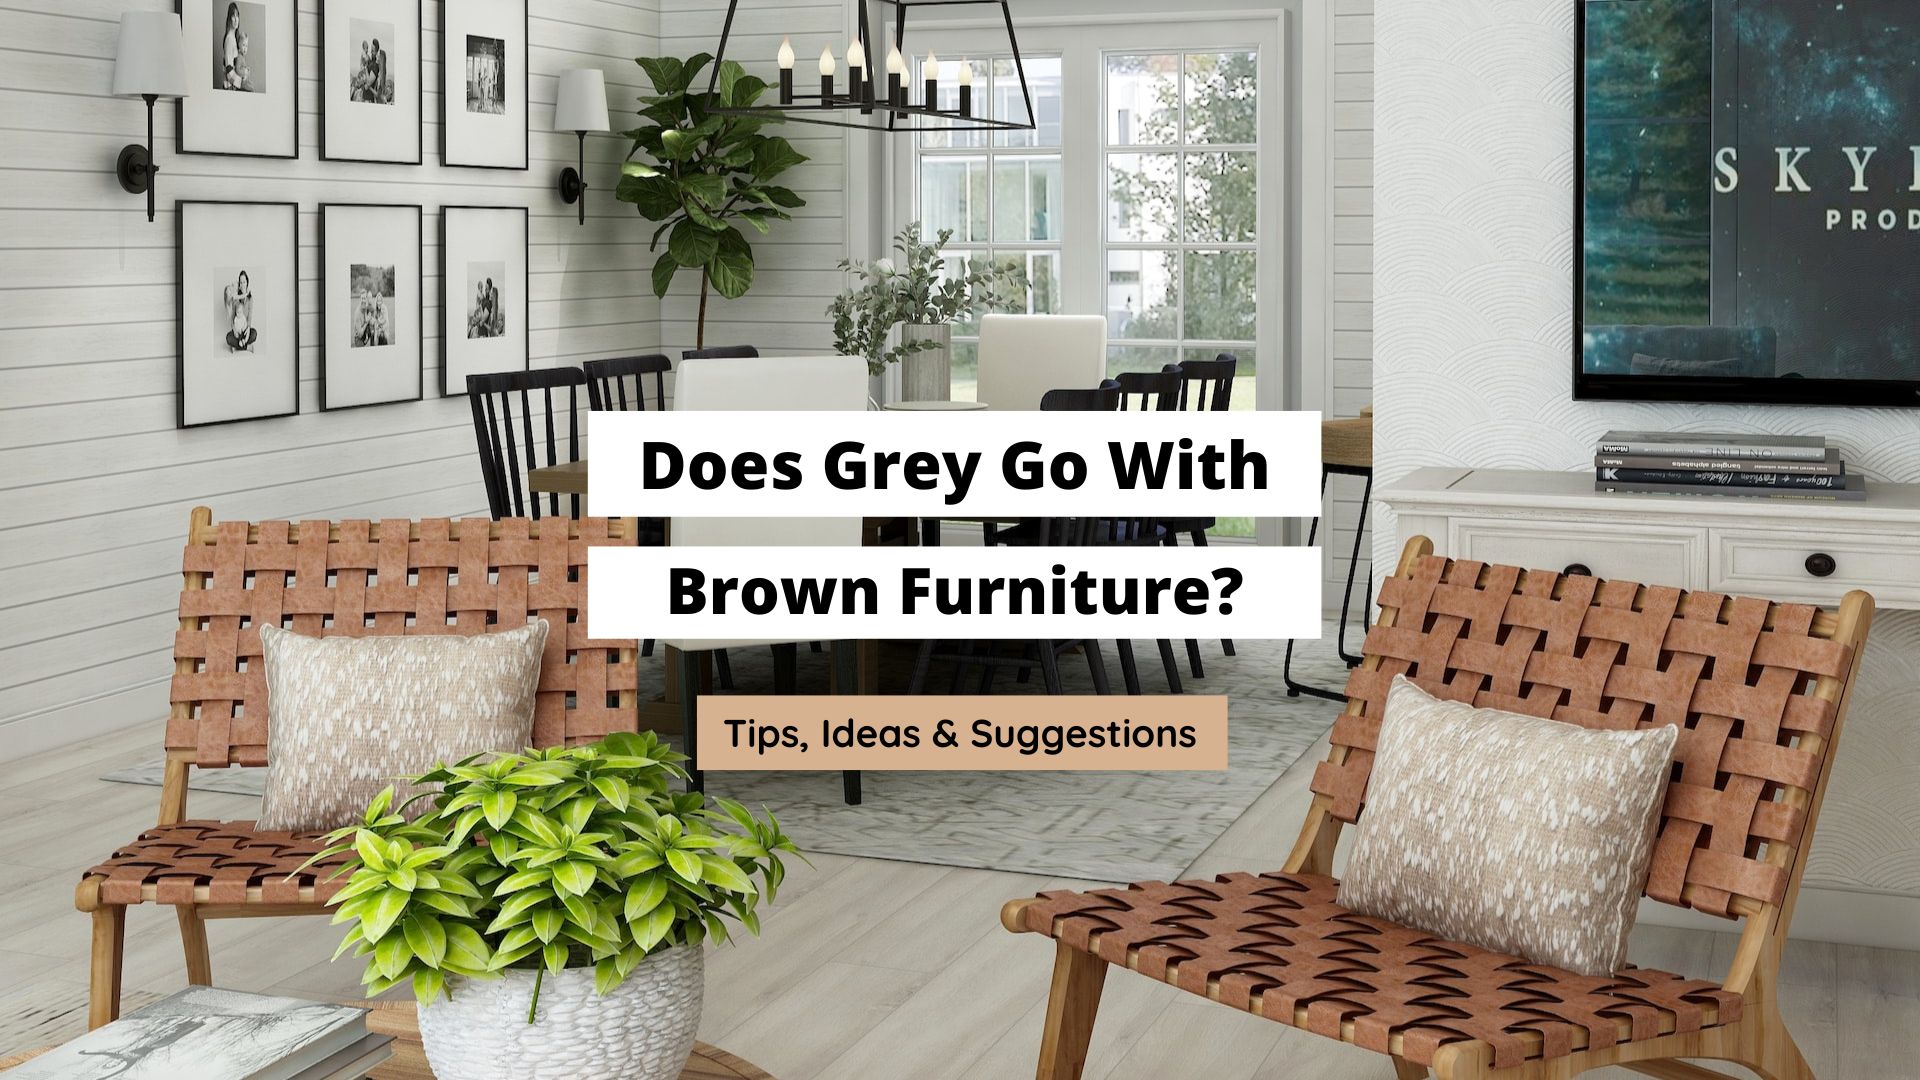 Does grey go with brown furniture